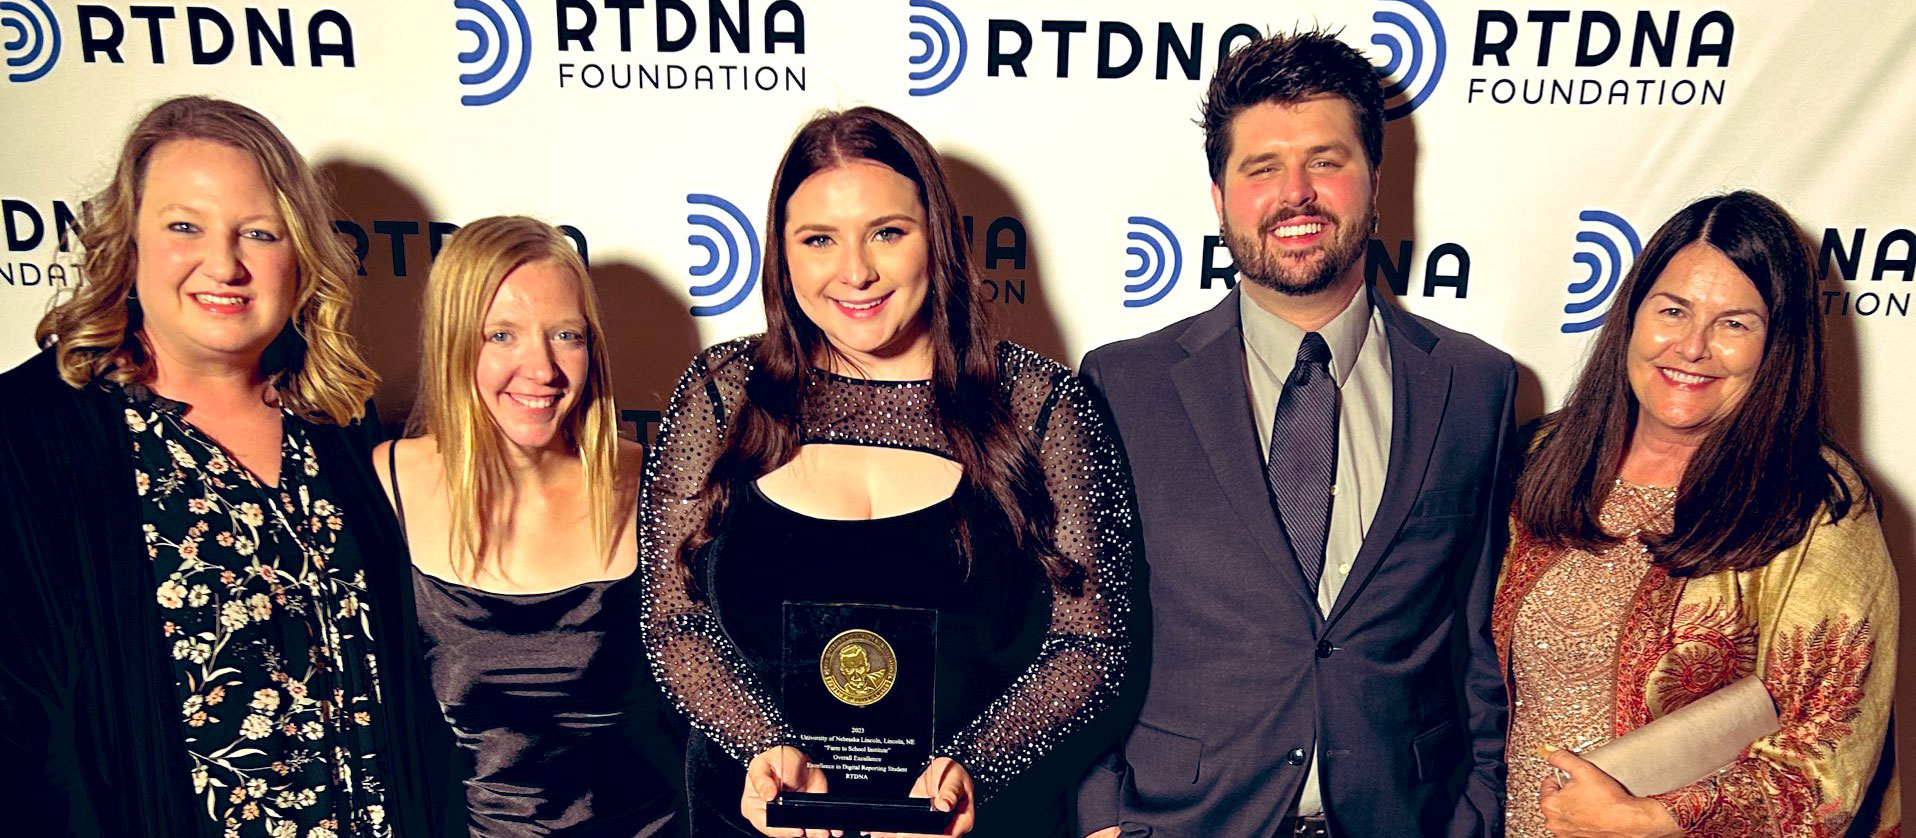 Five people stand with the center person holding an award